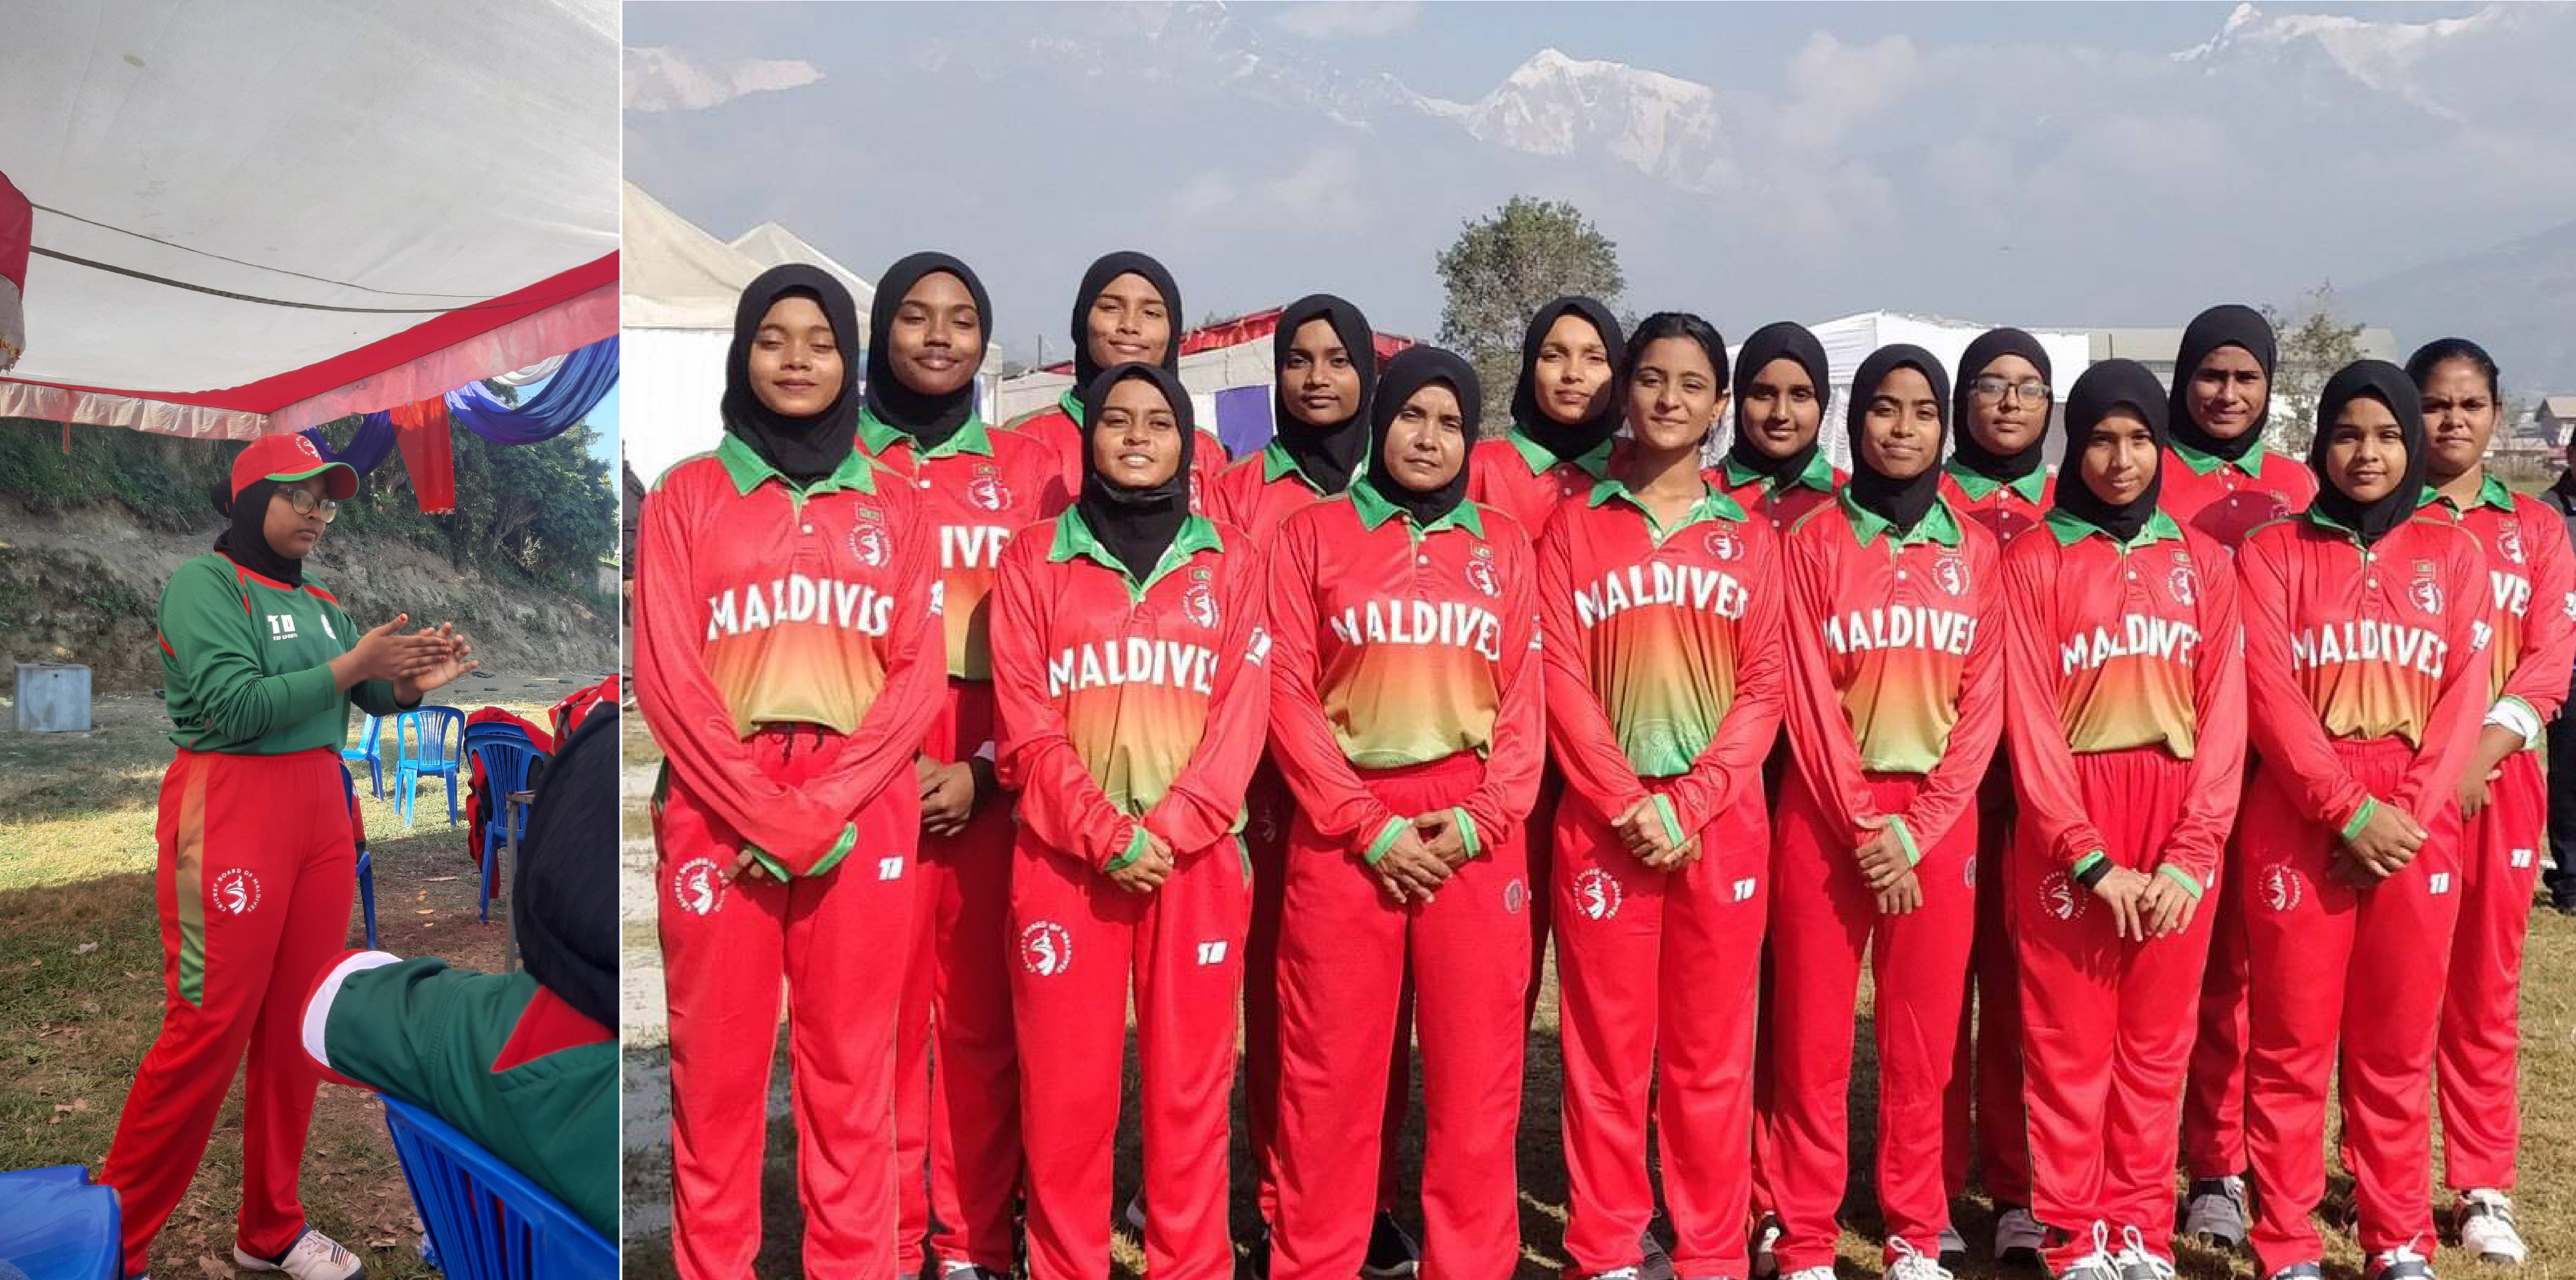 On the left: Leen in focus during practice. On the right: The Maldivian women’s cricket team at the 2019 Asian Games, ready for action. © Cricket Board of Maldives via Leen